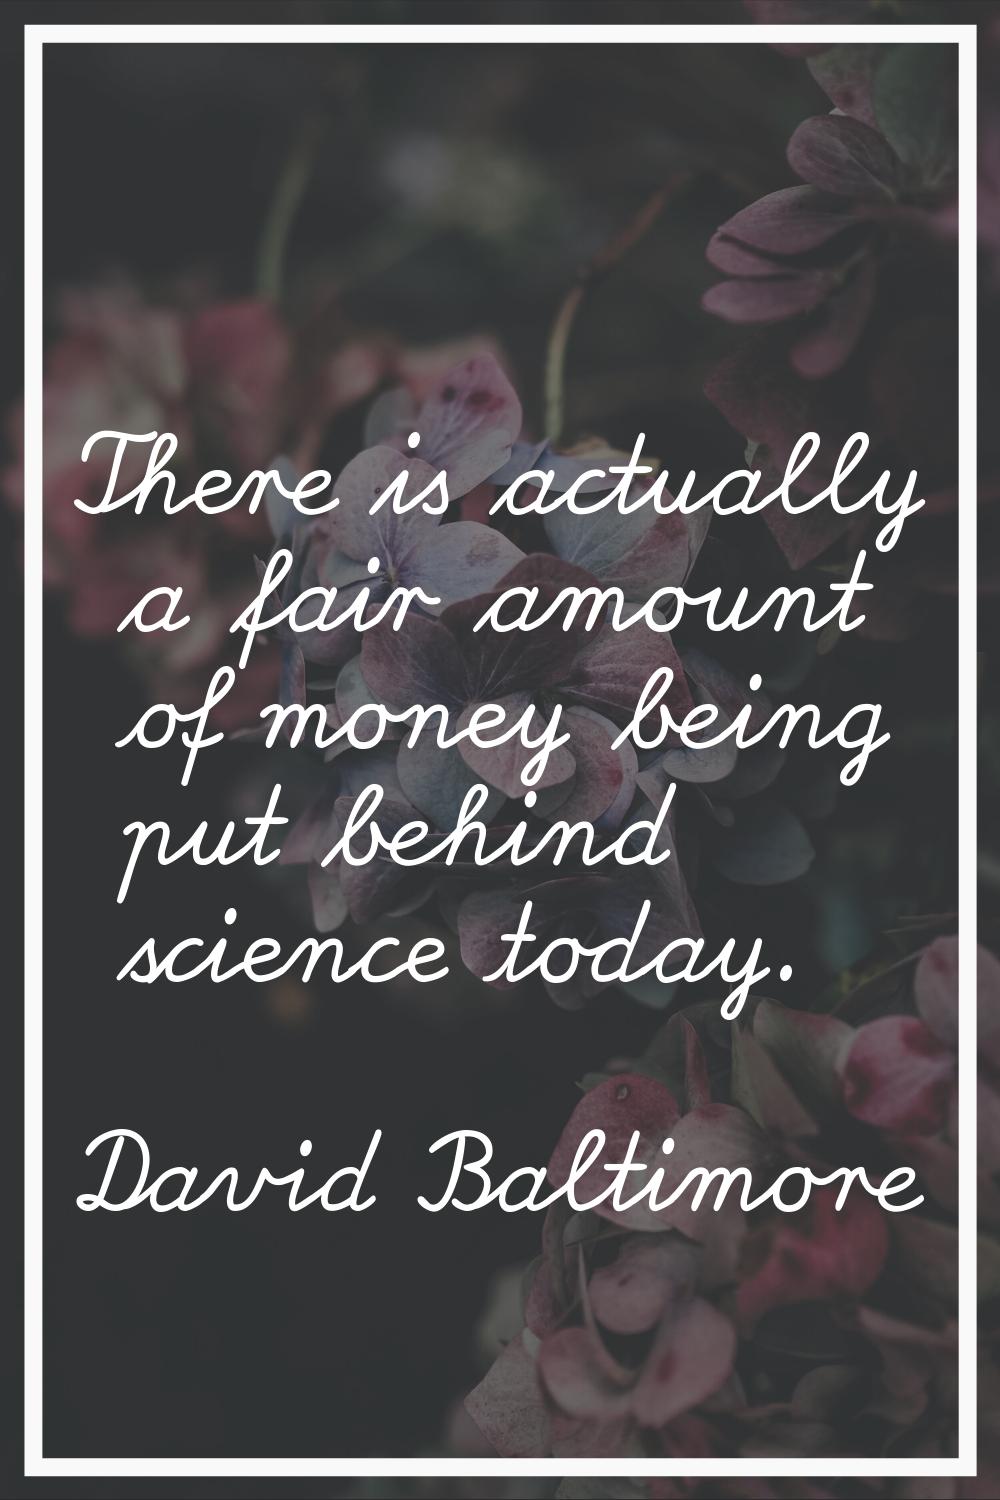 There is actually a fair amount of money being put behind science today.